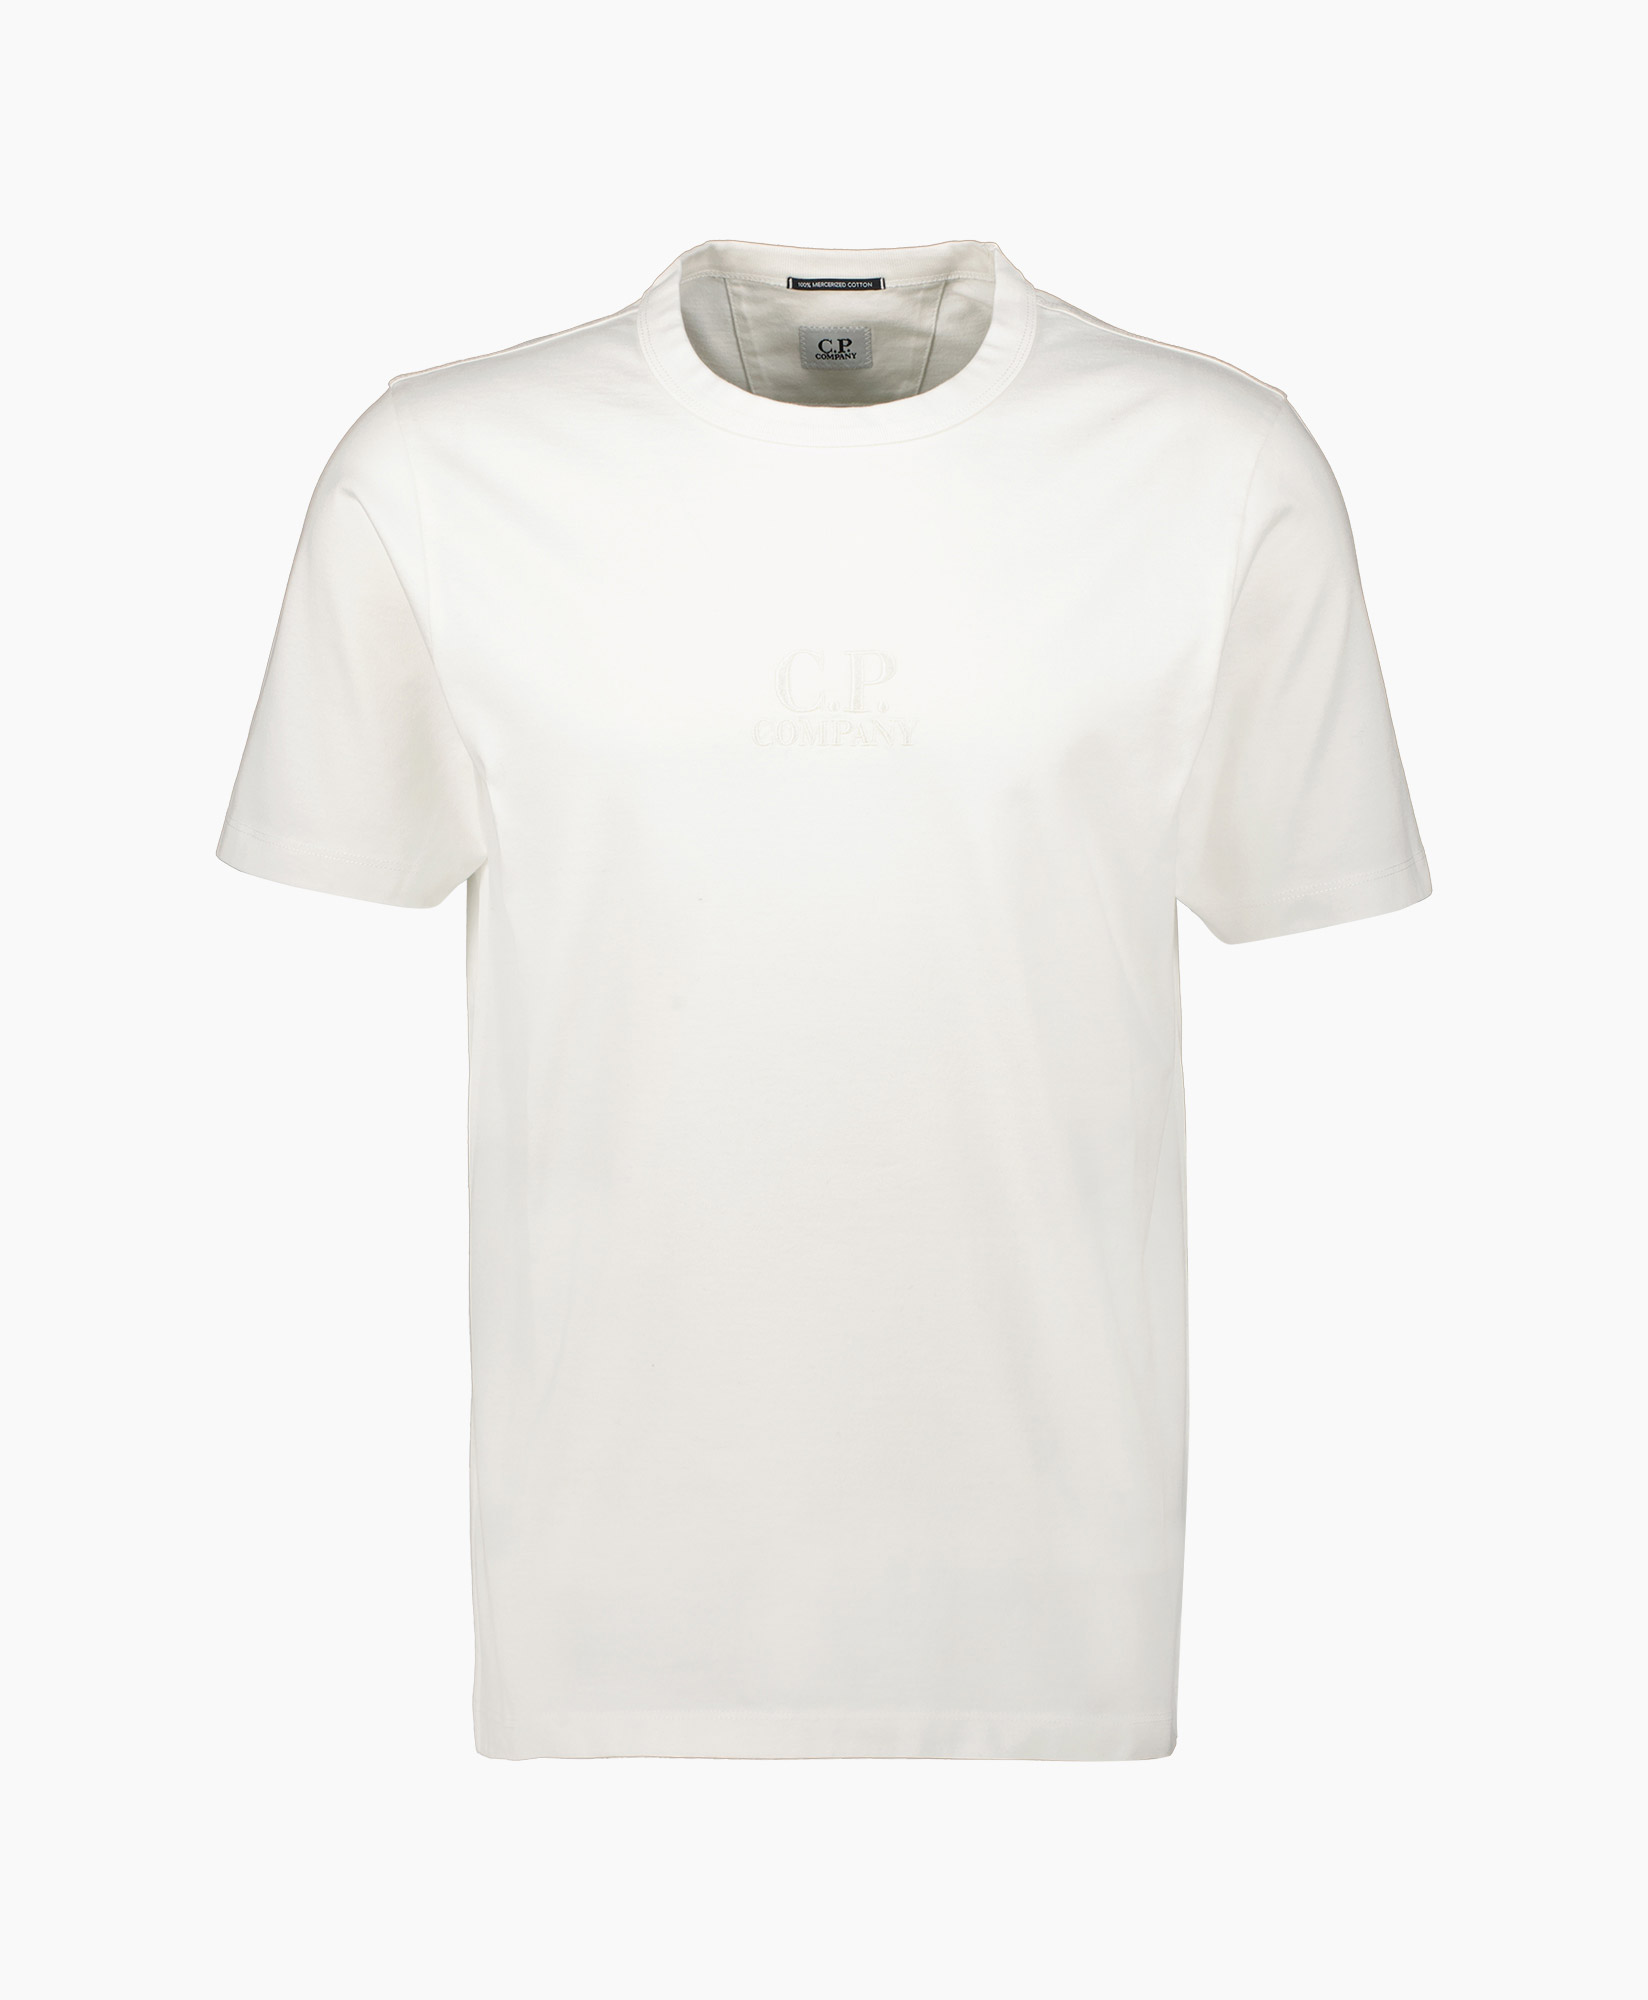 Cp Company T-shirt S159a-006499w Wit